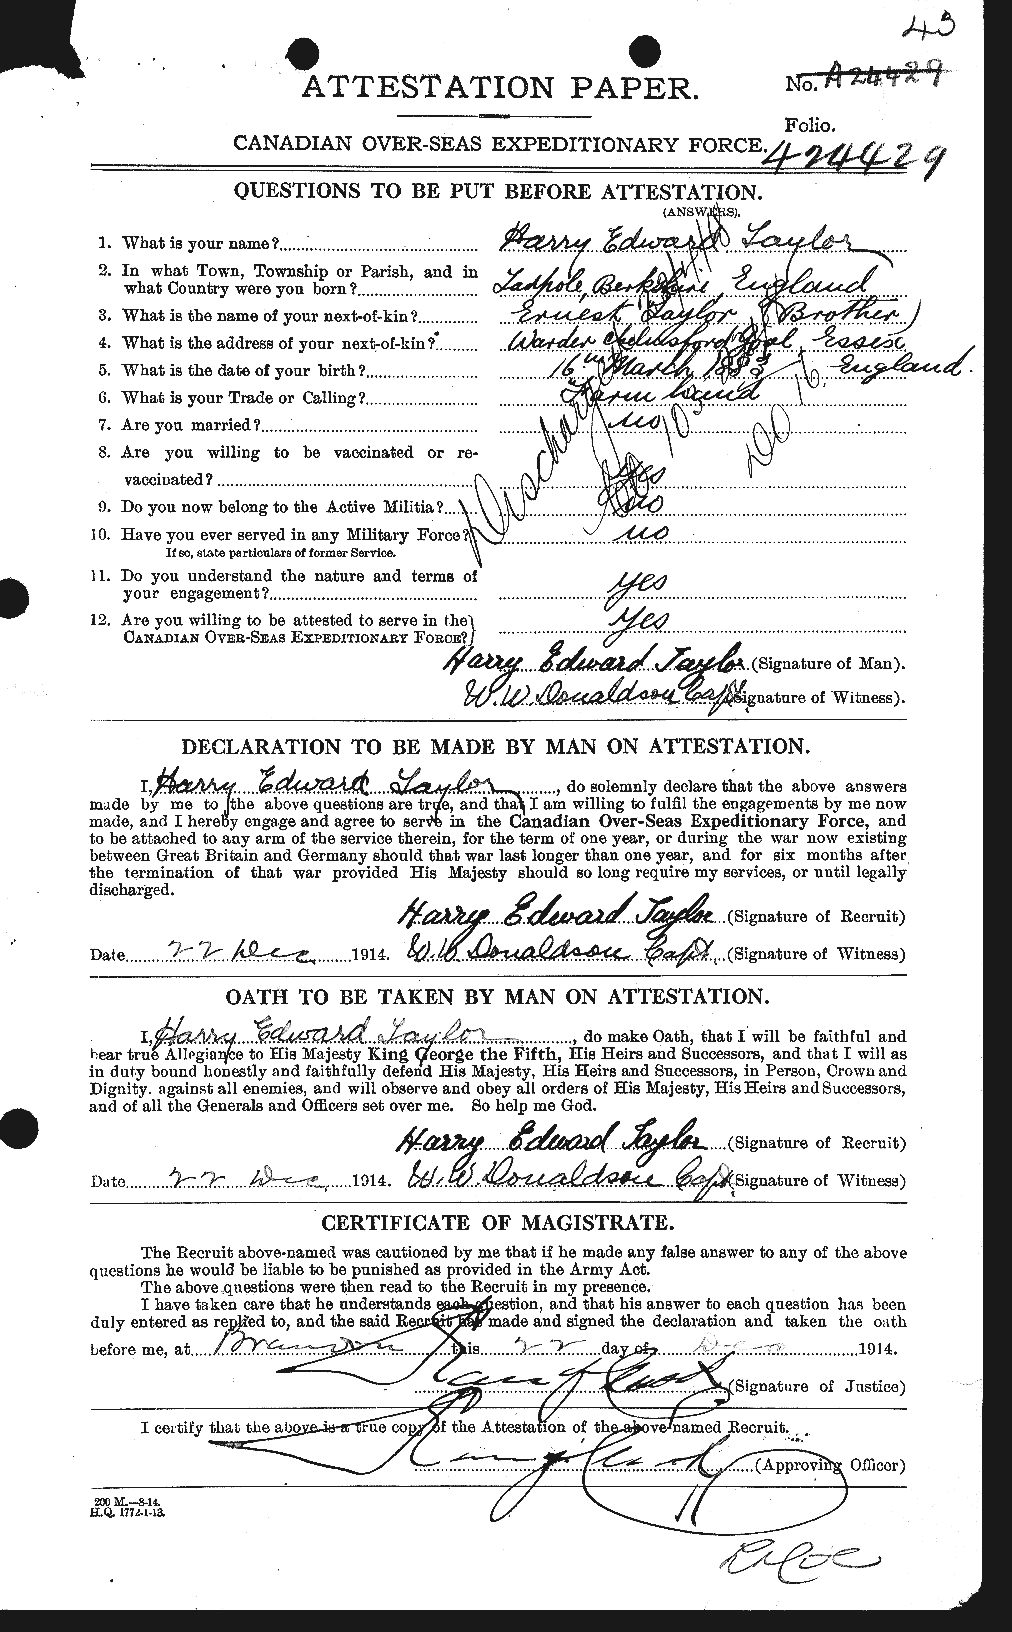 Personnel Records of the First World War - CEF 626492a